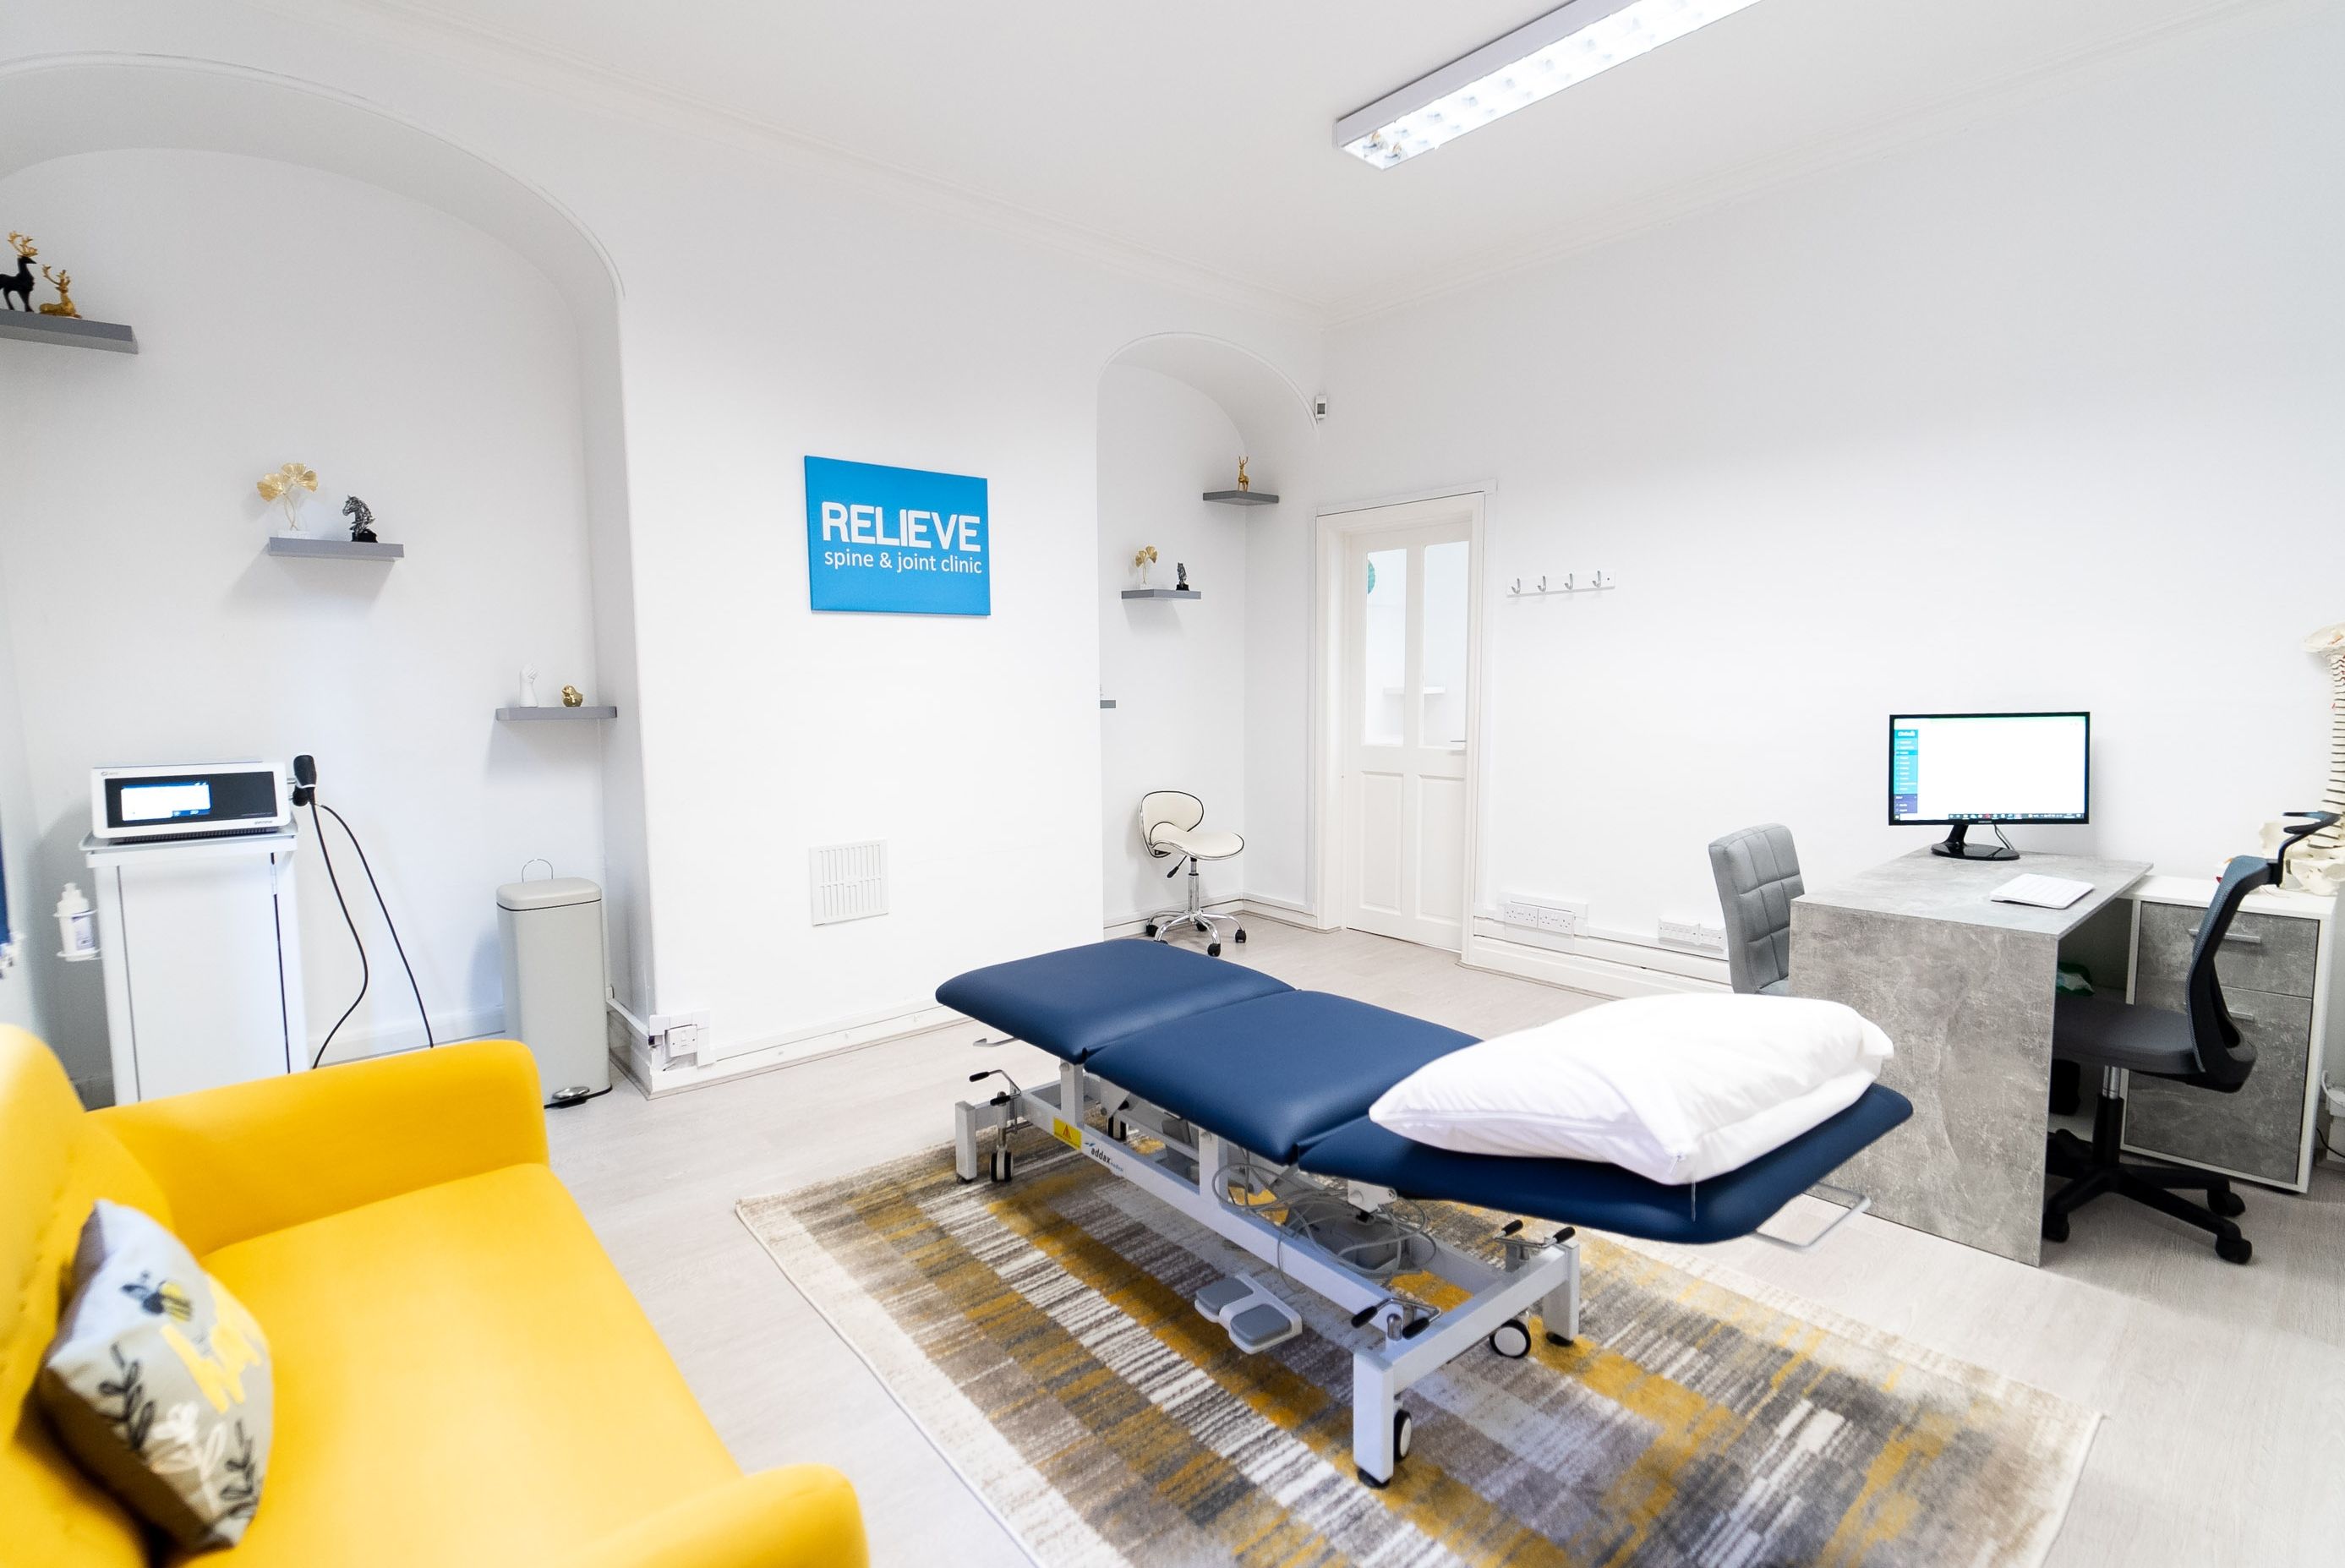 Contact Stunning Treatment Therapy Room To Rent In Leeds City Centre Clinic Ls1 Based In